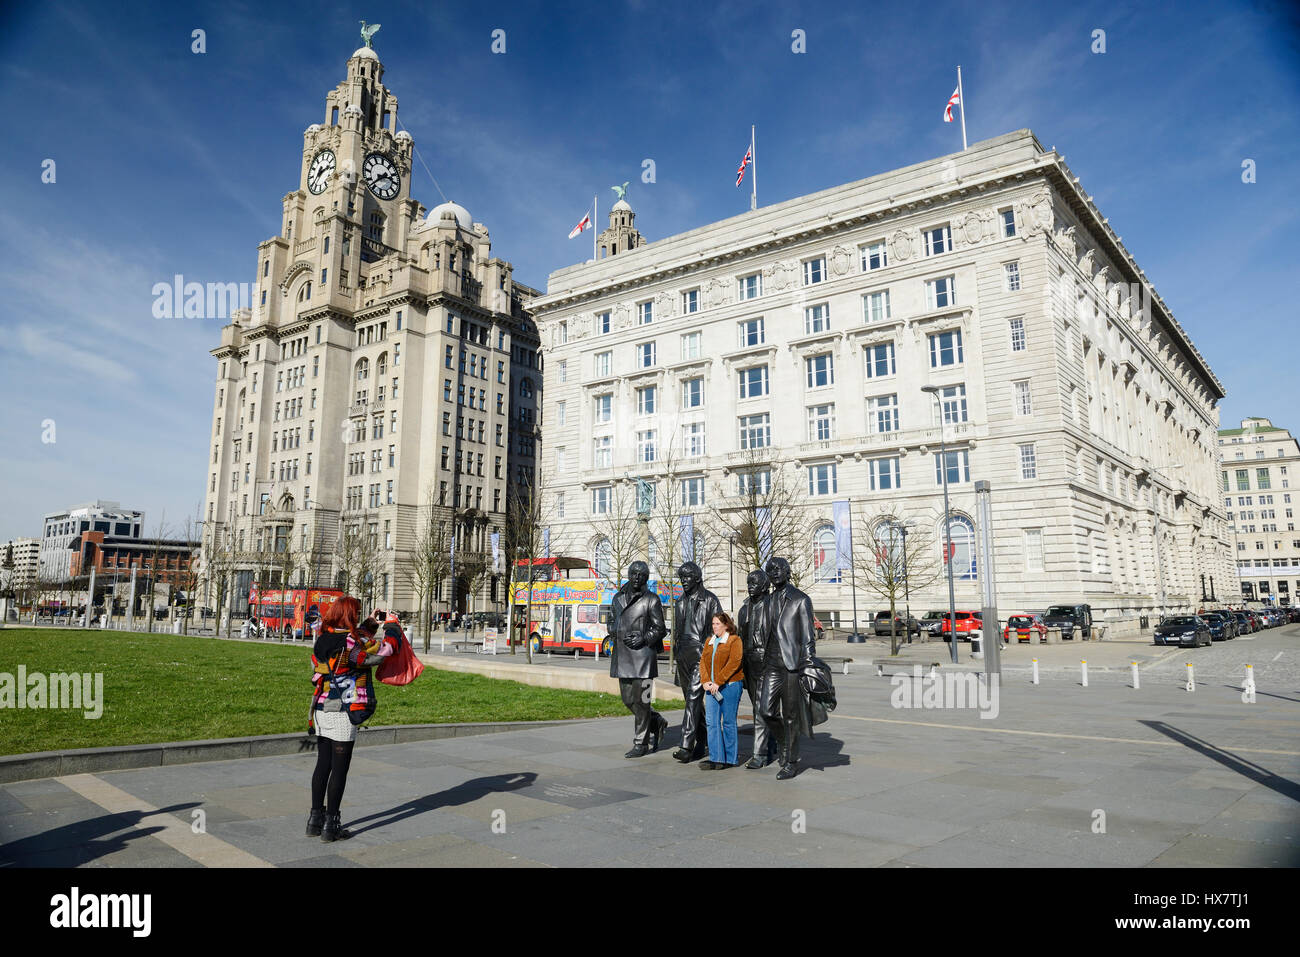 Tourists pose for photographs with the statues of the world famous 1960's group, The Beatles. Statues of the famous Liverpool Group The Beatles situat Stock Photo